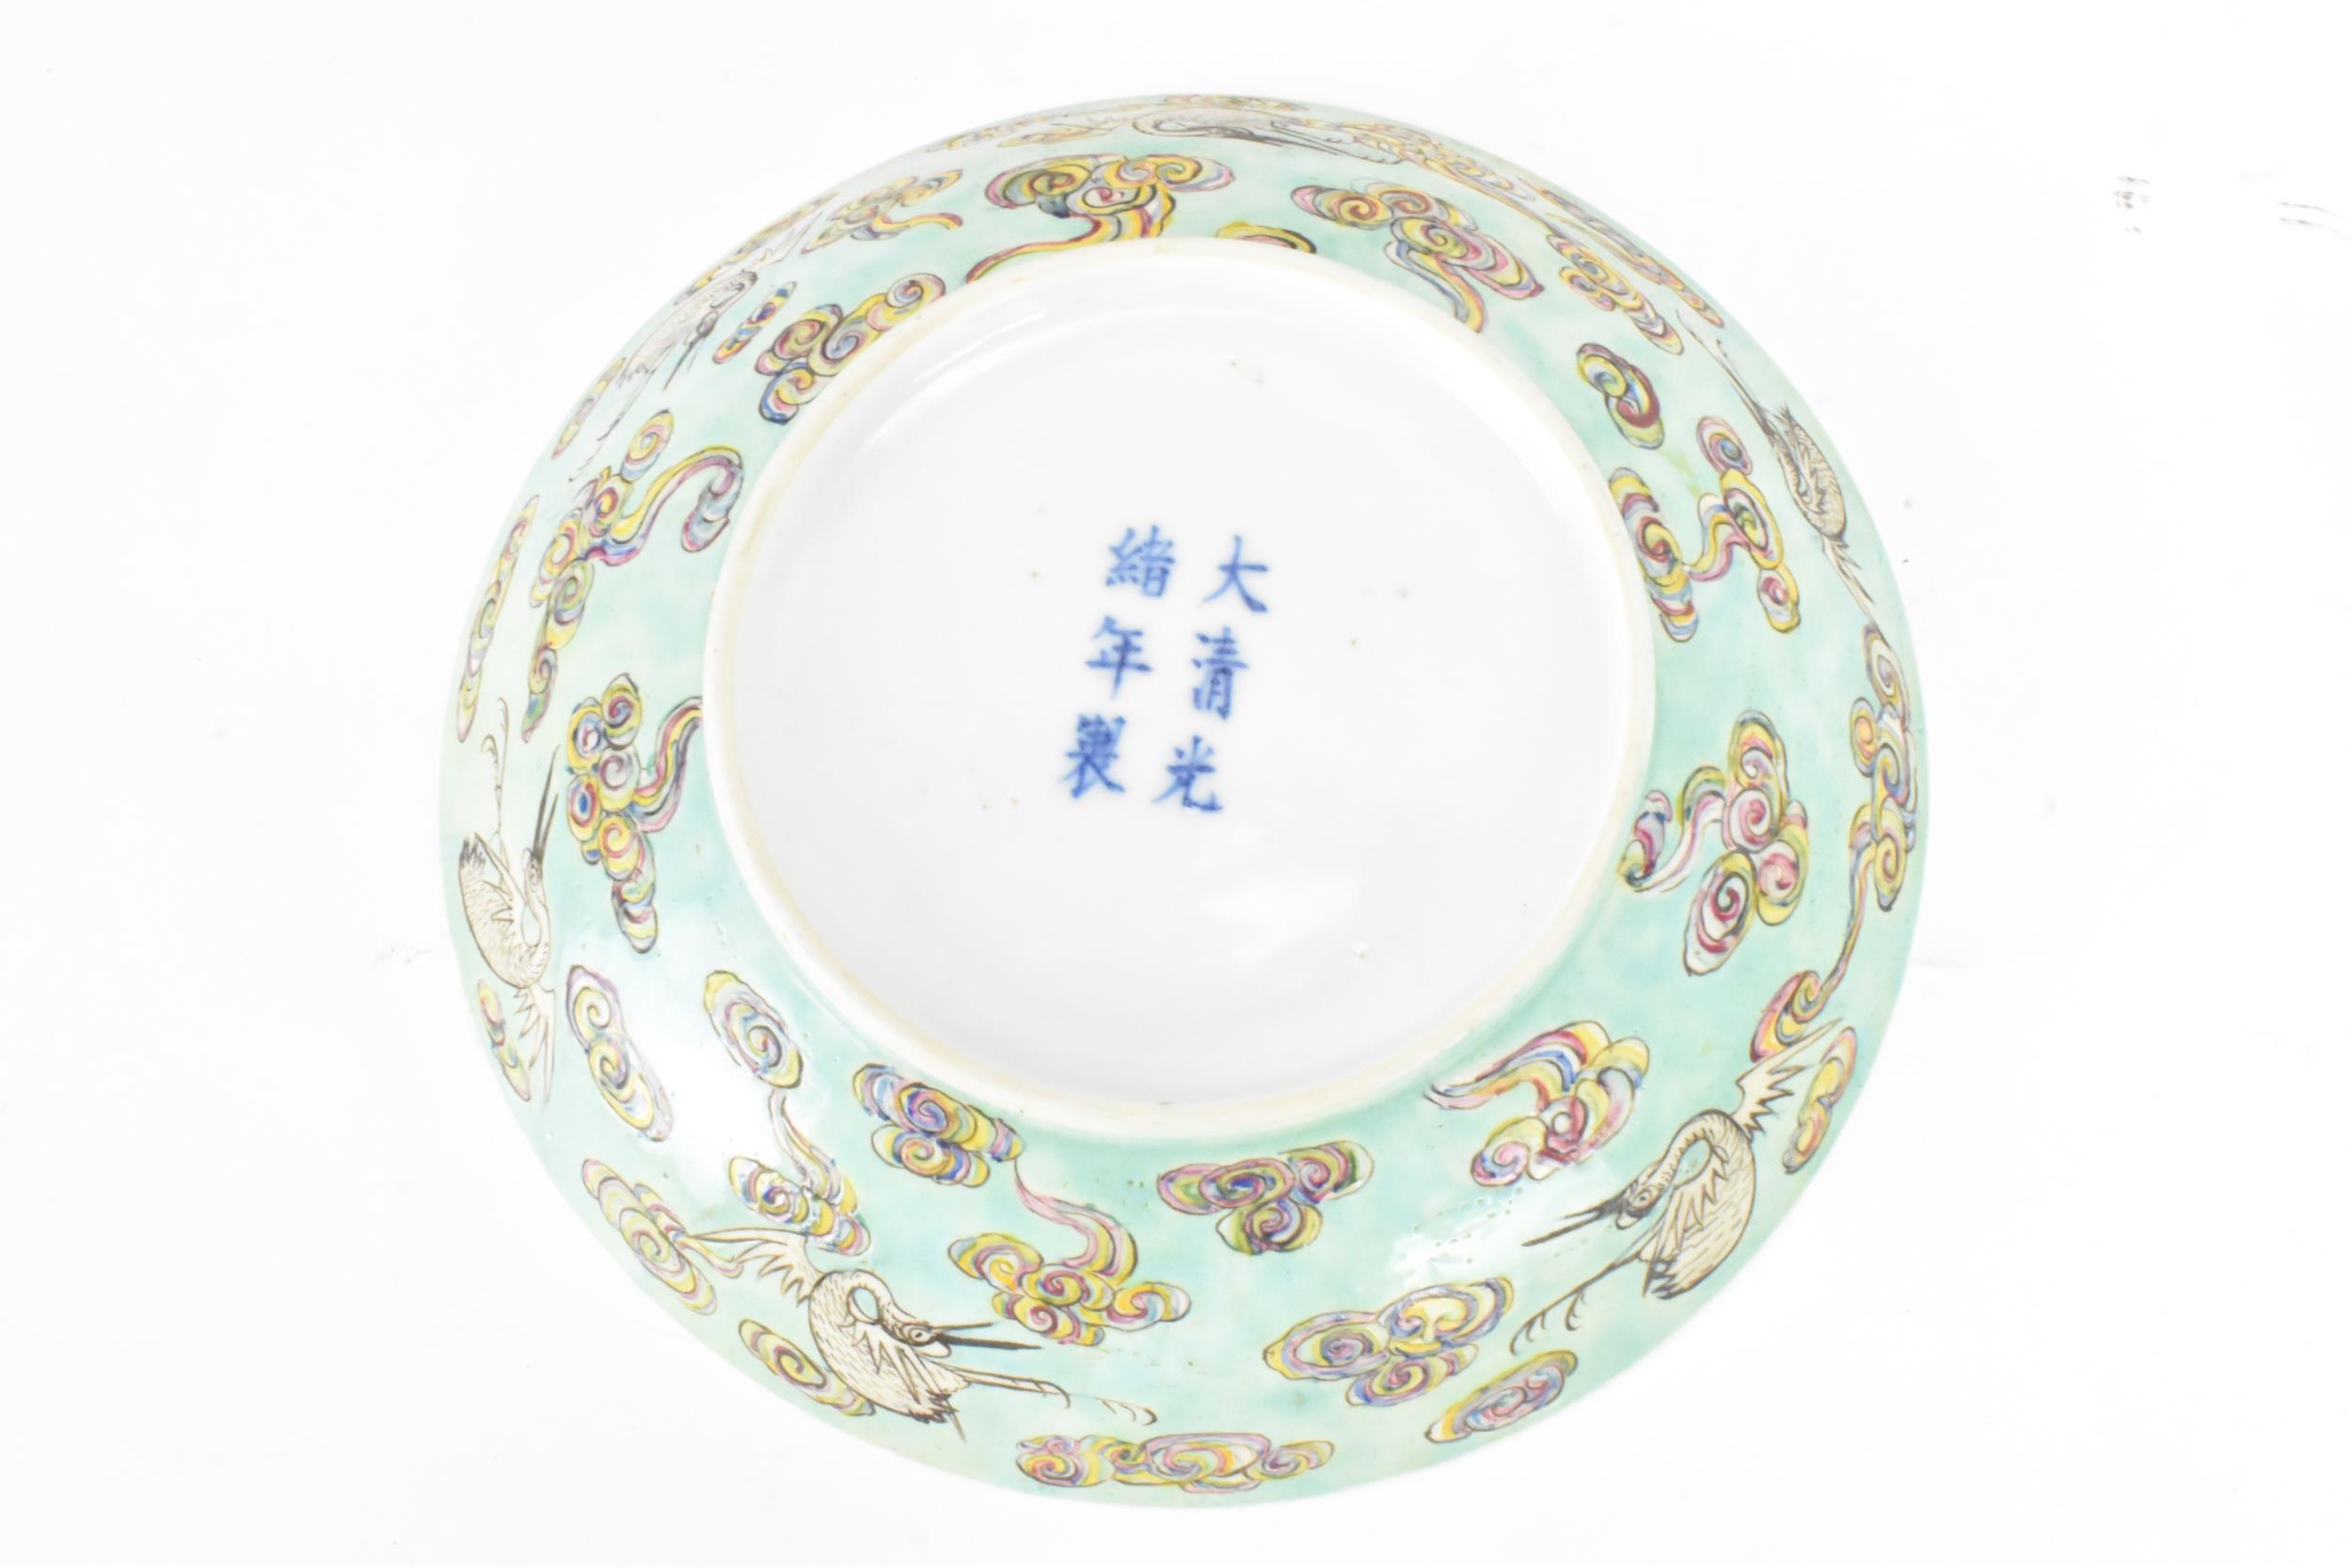 A set of three Chinese Qing dynasty, Guangxu period, famille rose bowls, decorated in polychrome - Image 3 of 7